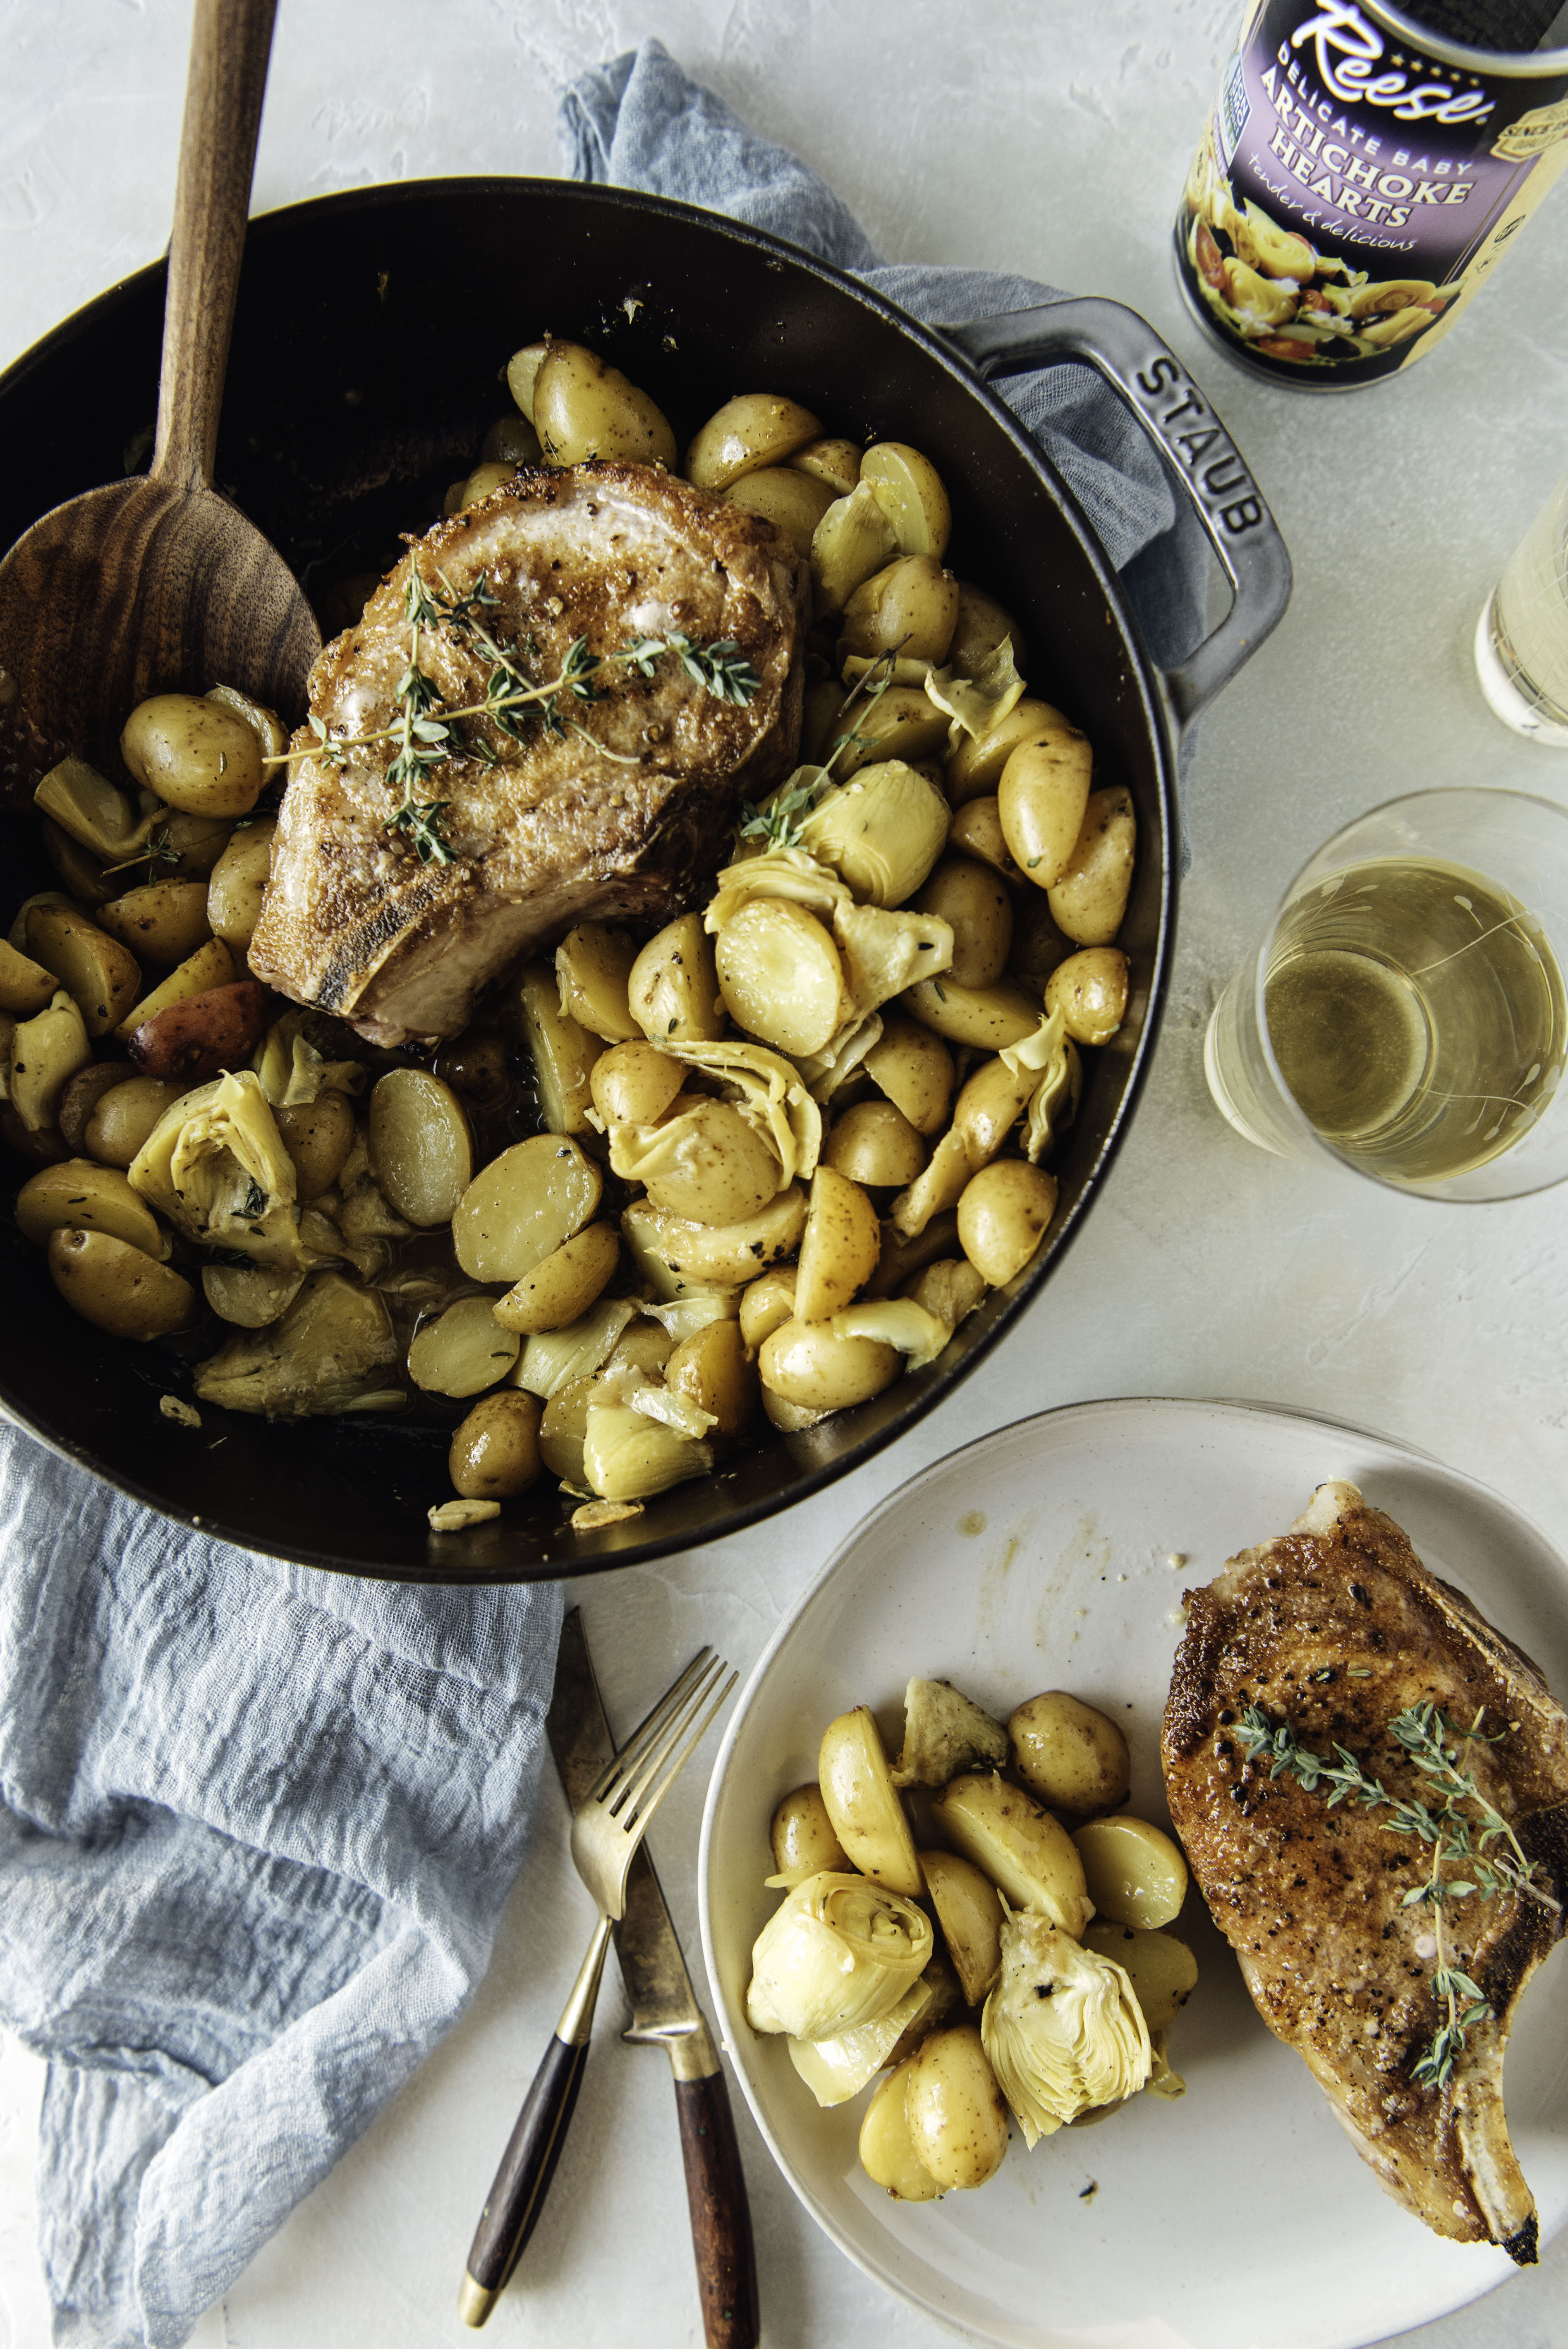 Roasted Pork Chops with New Potatoes and Baby Artichokes